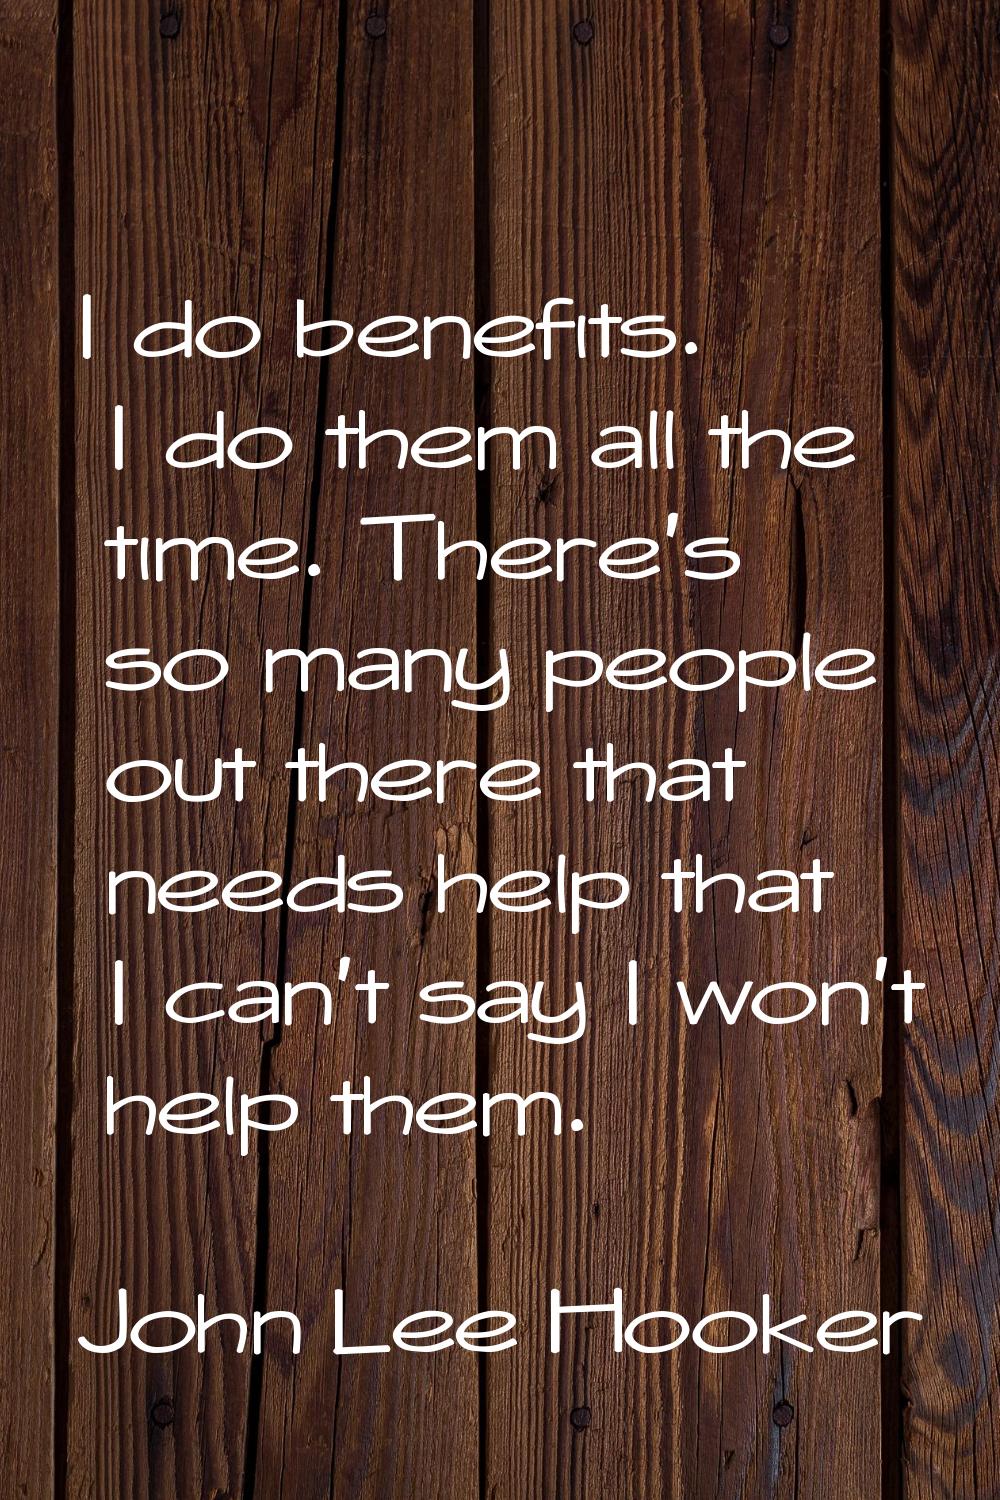 I do benefits. I do them all the time. There's so many people out there that needs help that I can'